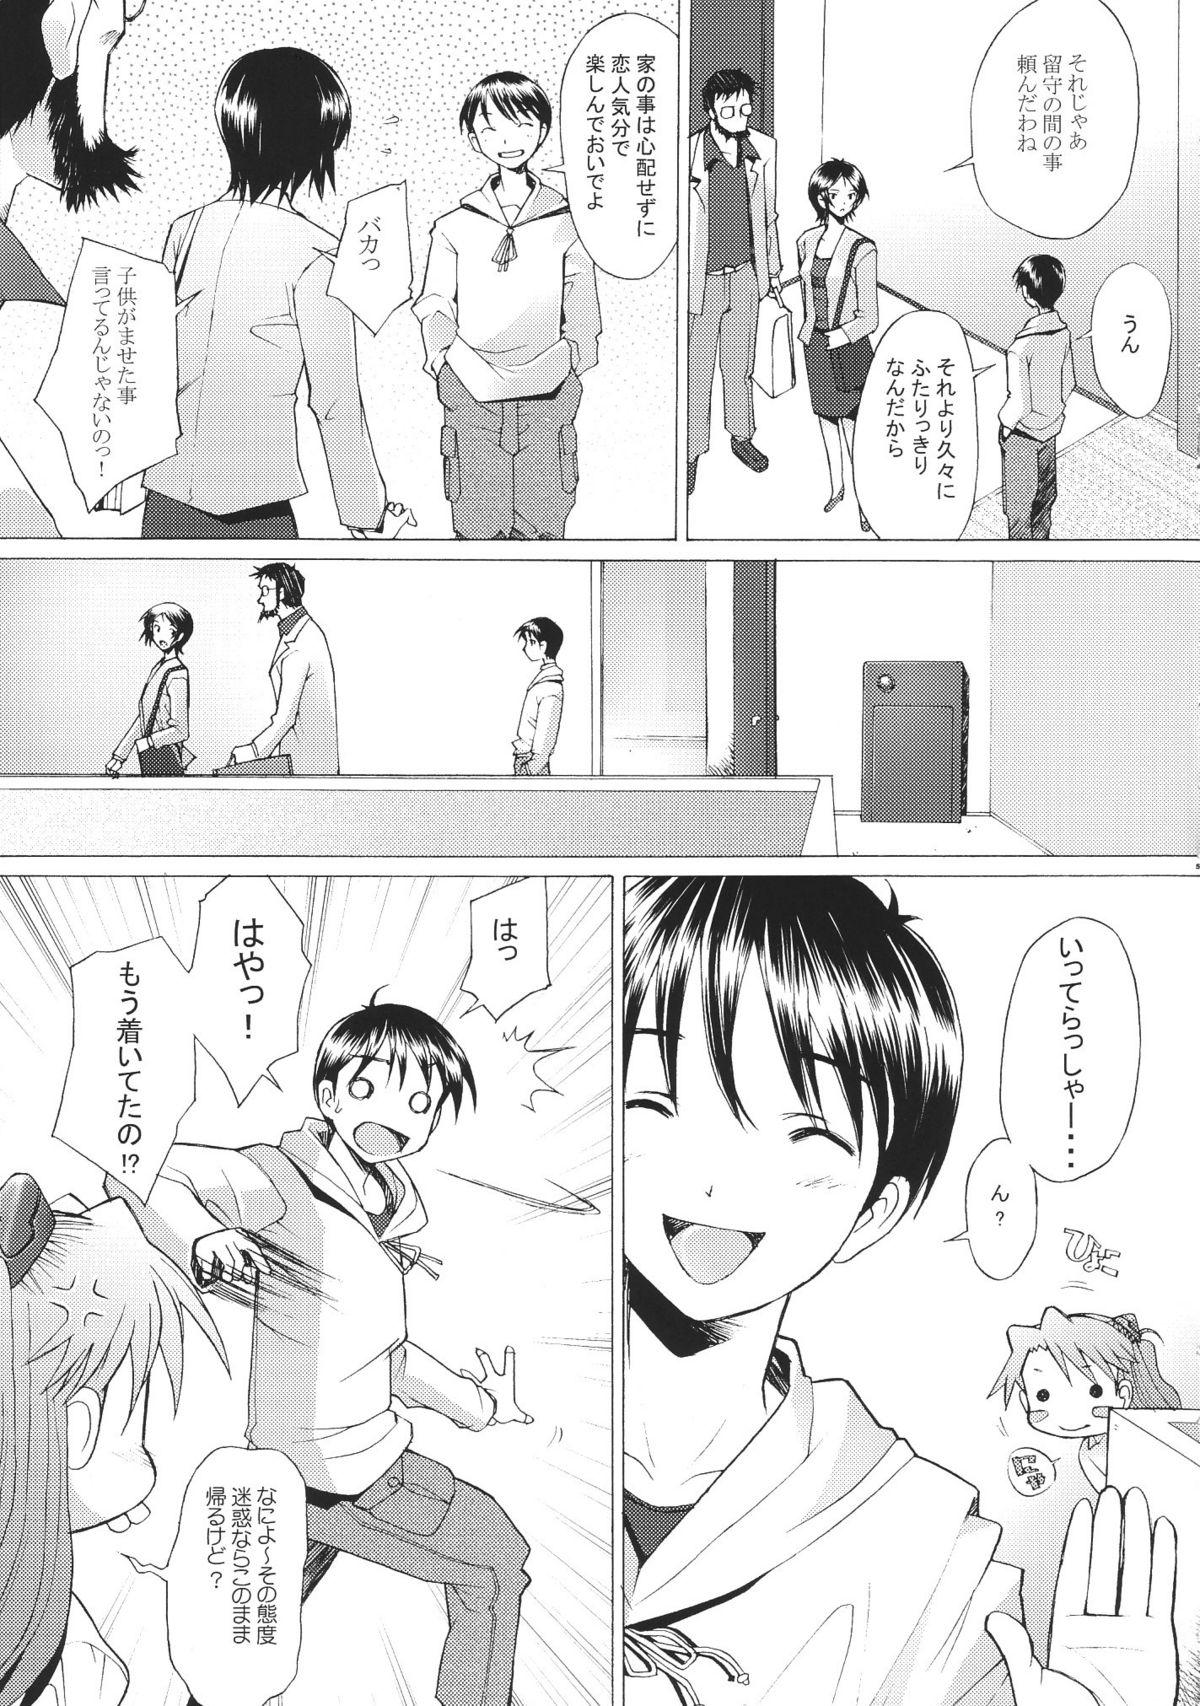 Passion More!2 - Neon genesis evangelion Naughty - Page 4